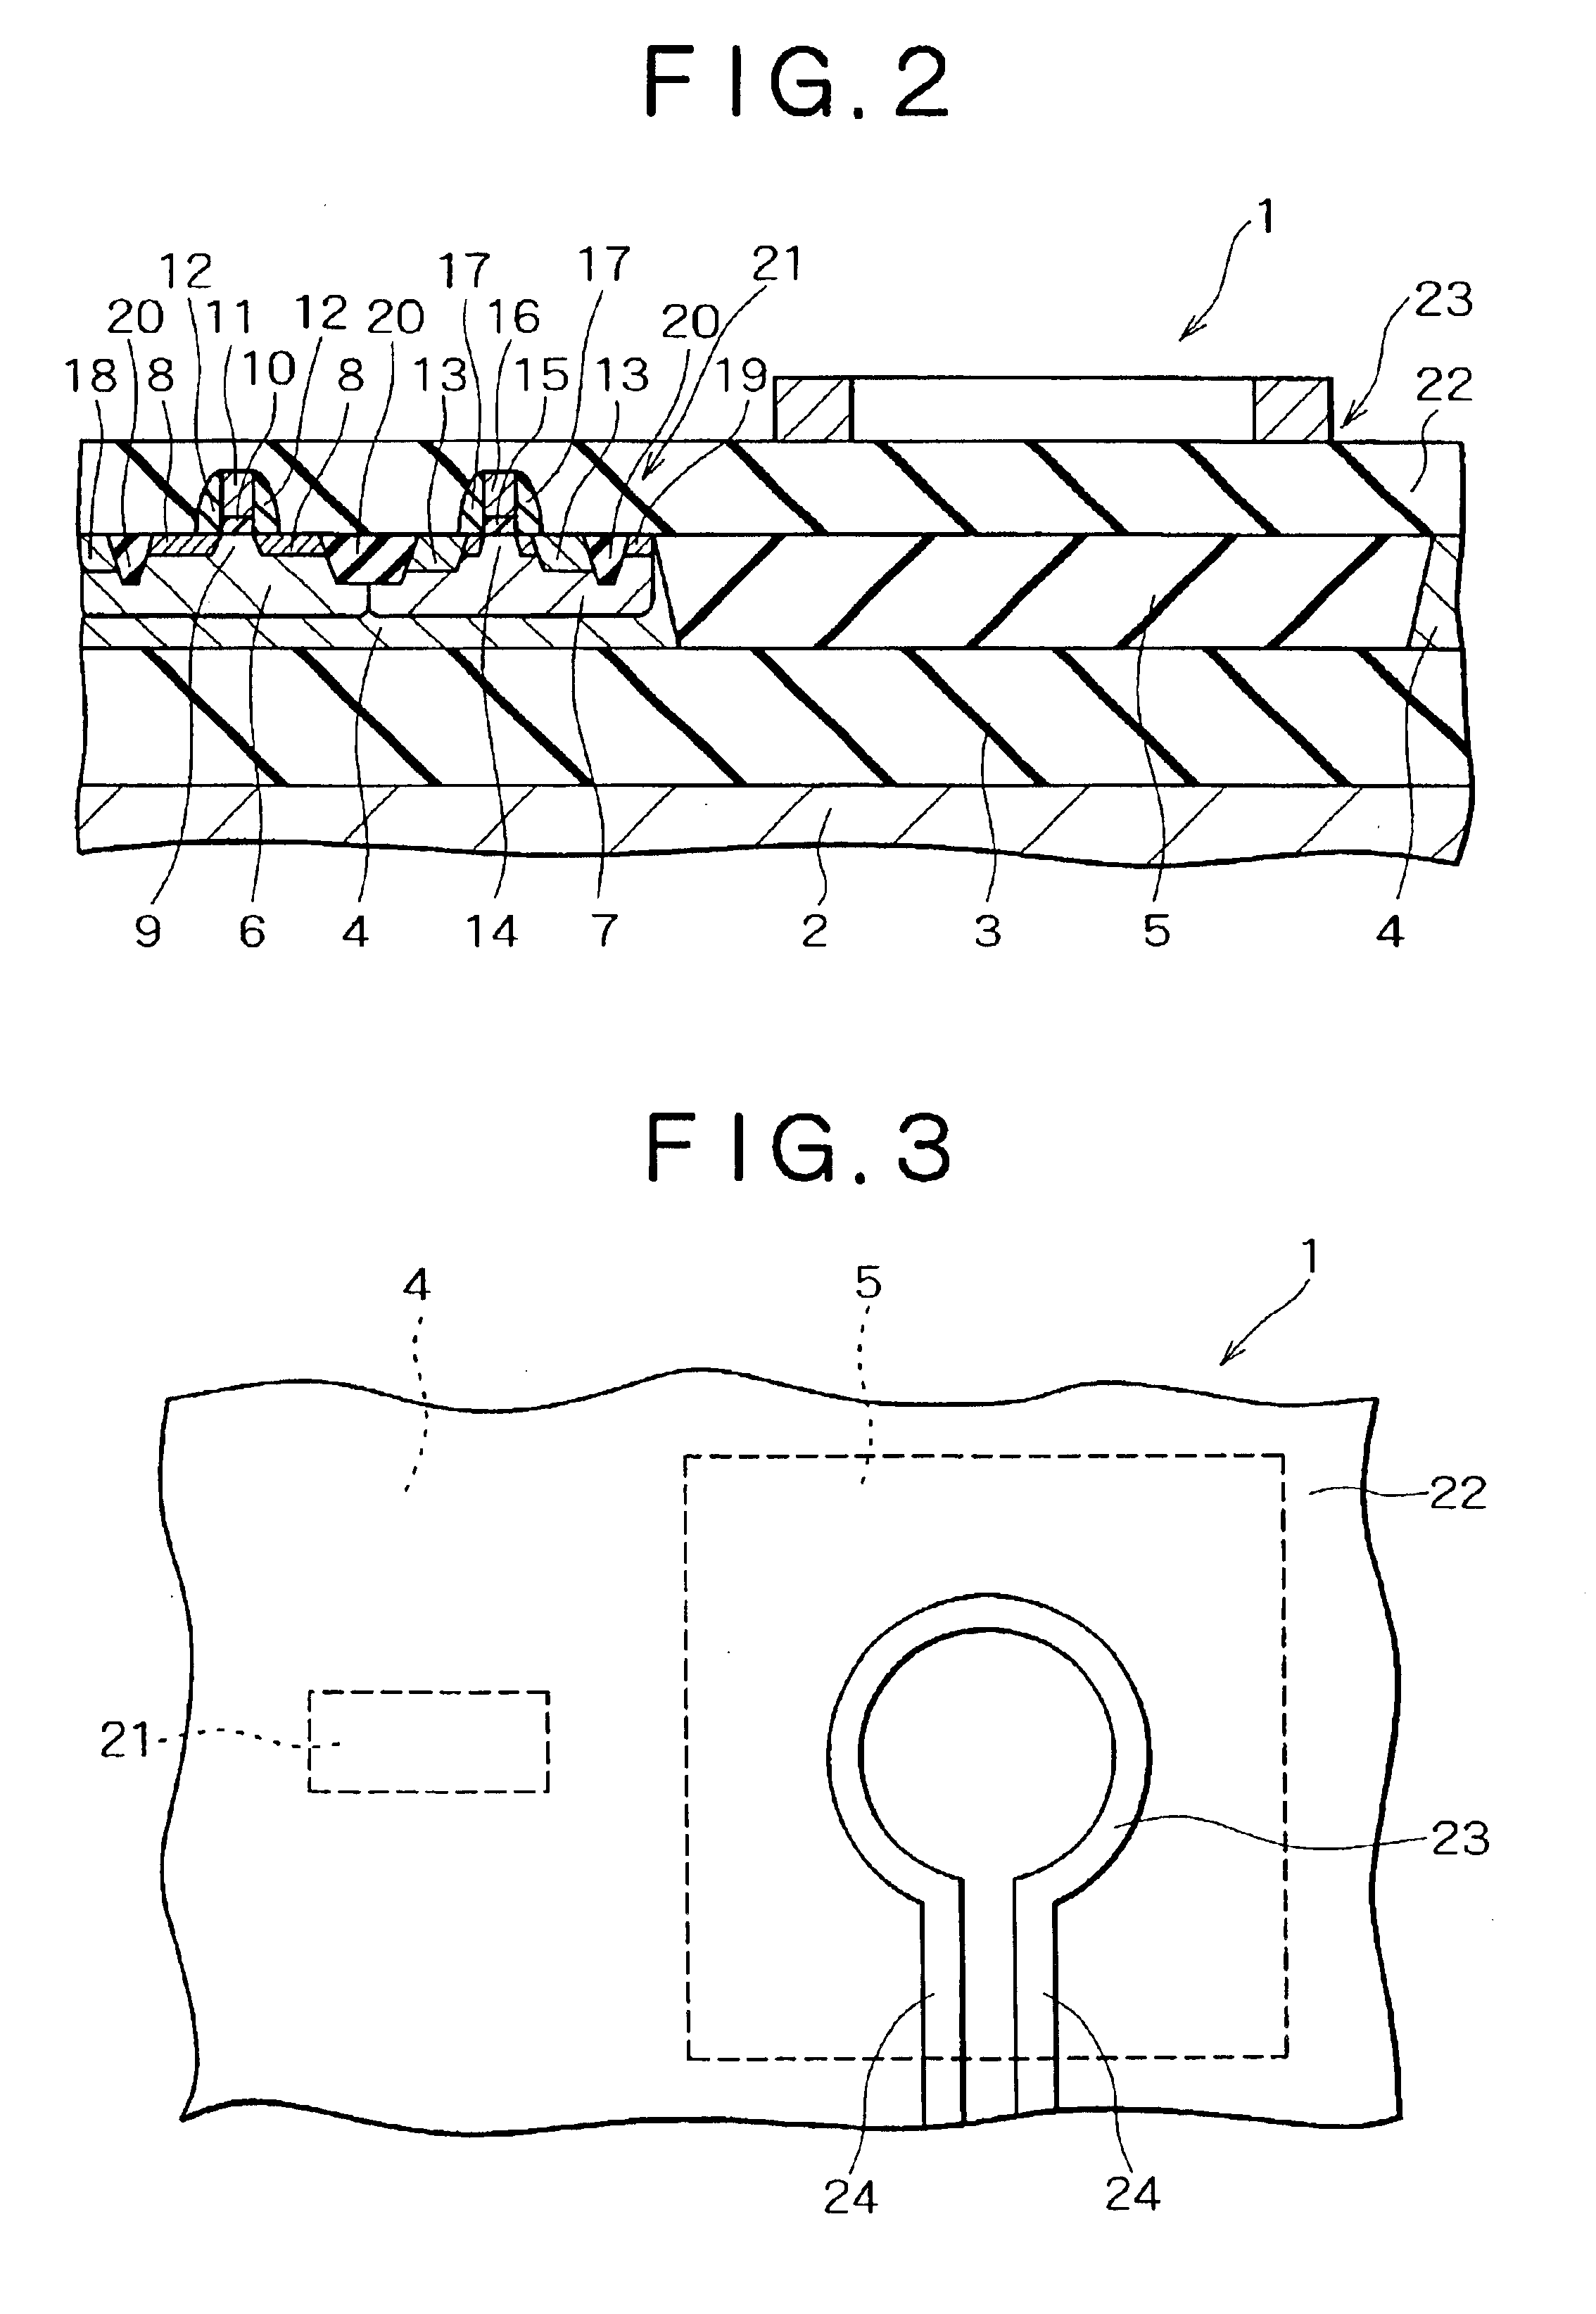 Integrated circuit including an inductor, active layers with isolation dielectrics, and multiple insulation layers